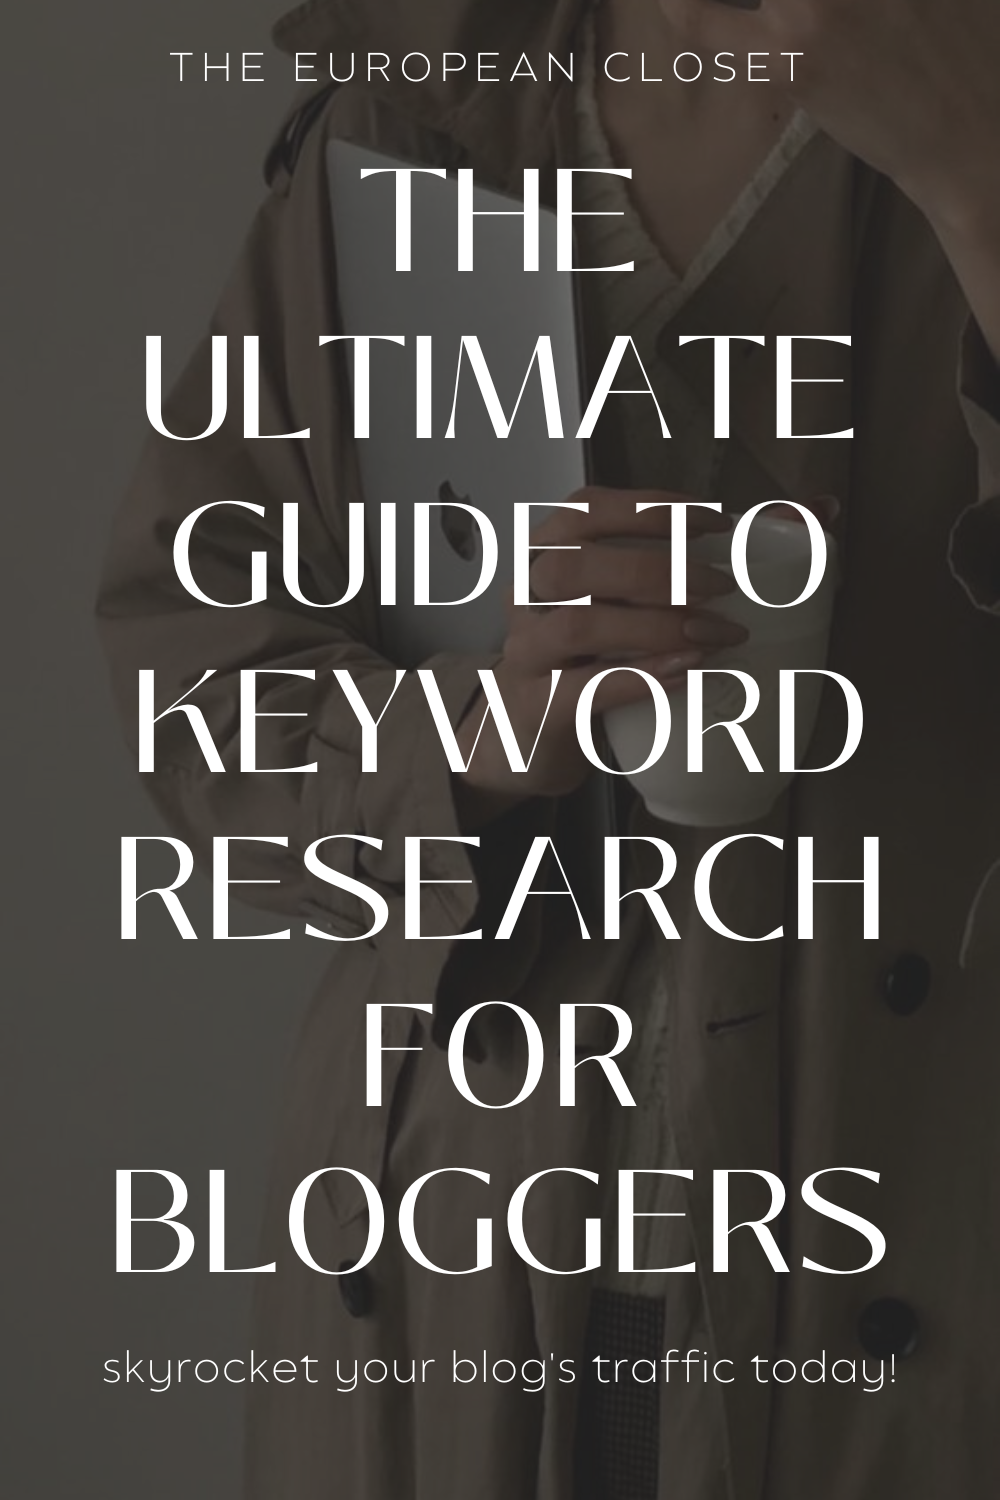 Here is the ultimate guide to keyword research for bloggers where I break down every single thing you need to do to rank on the 1st page of google